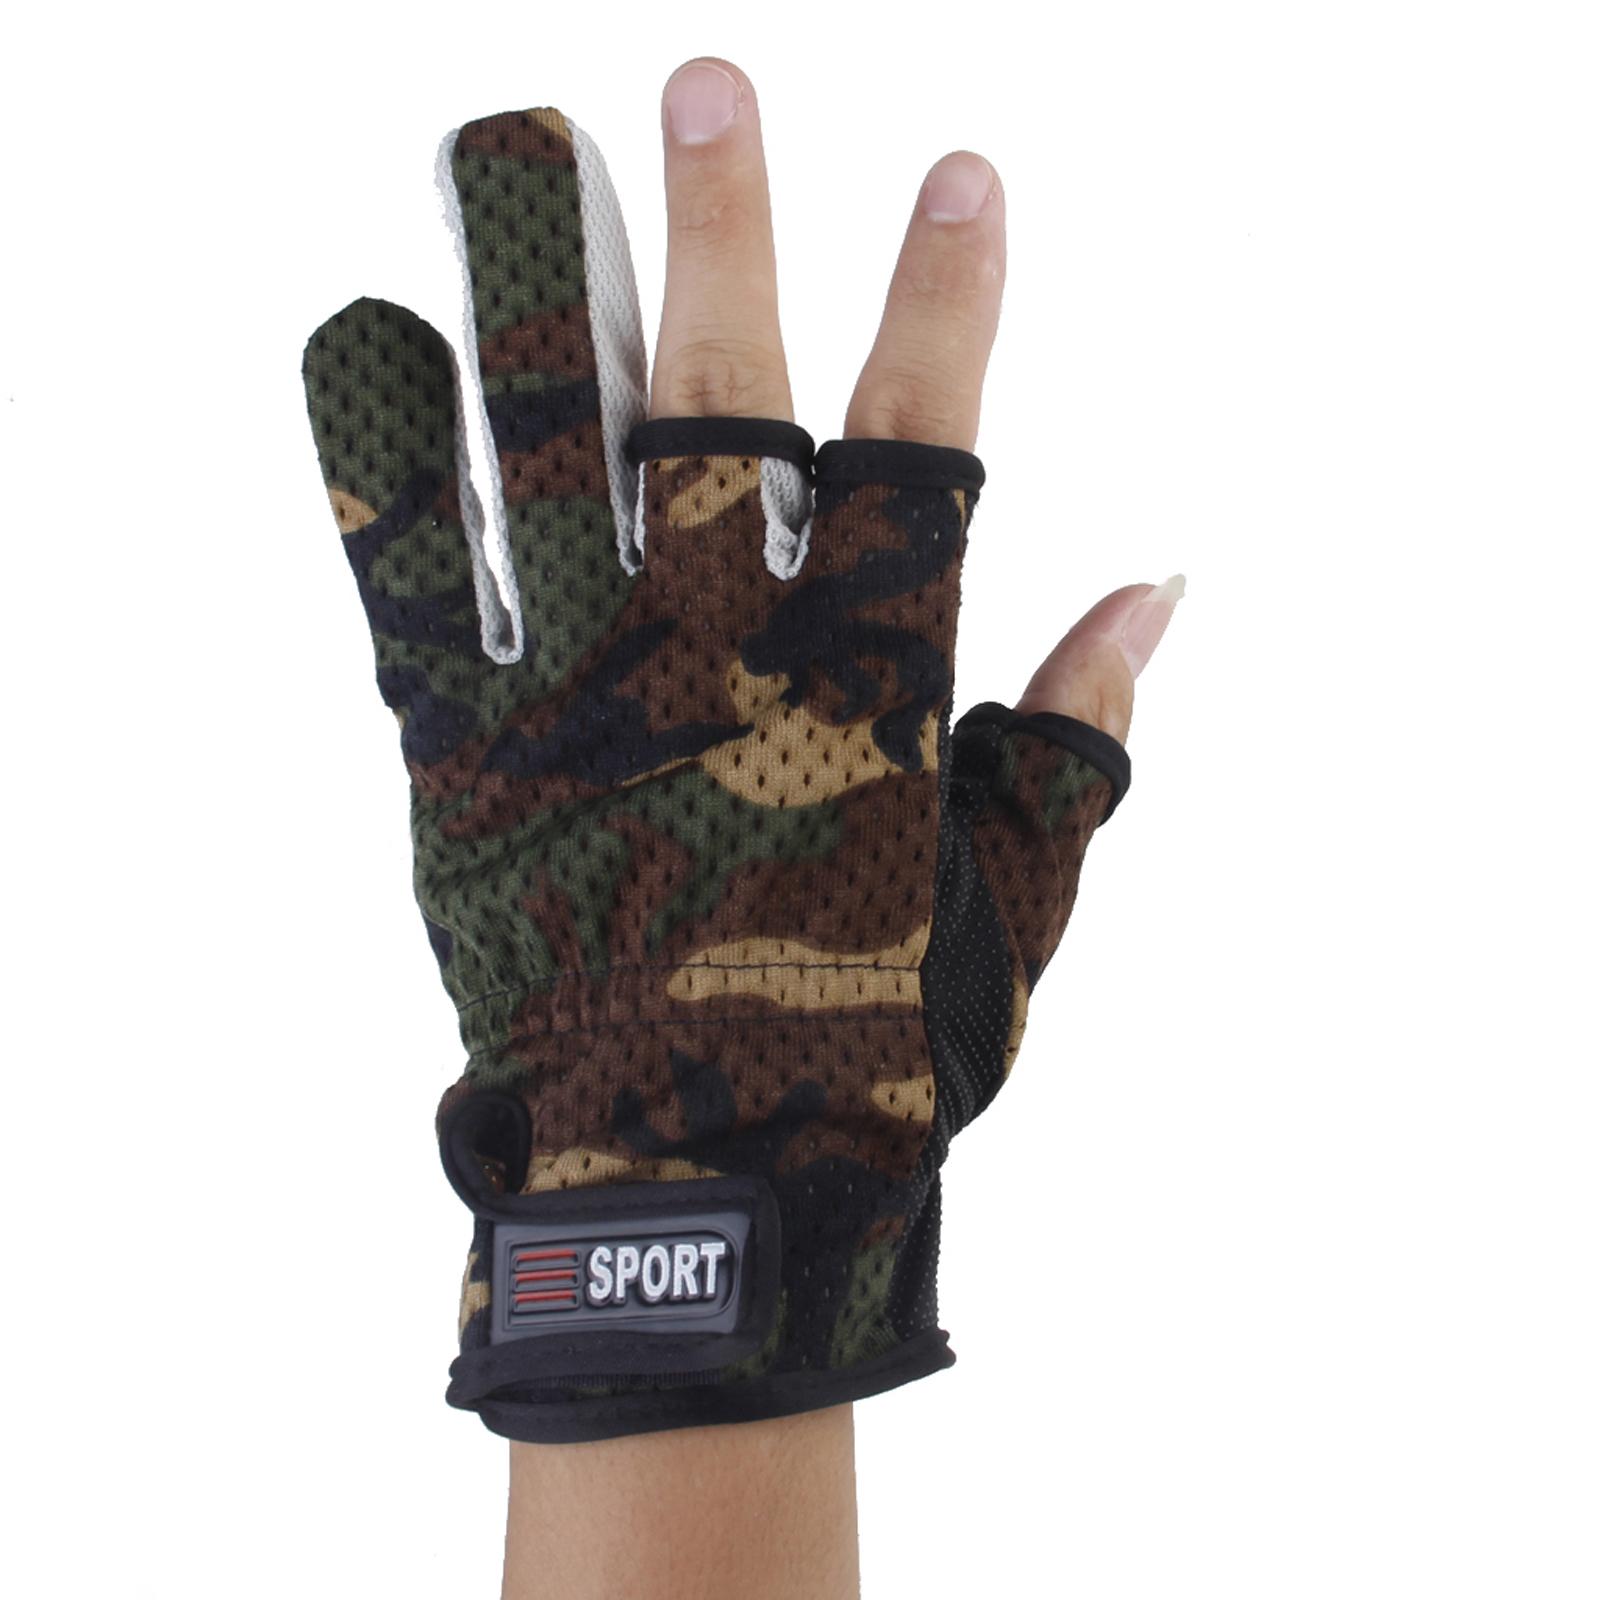 Anti Slip Friction Palm 3 Low Cut Fingers Fishing Gloves 1 Pair Camouflage